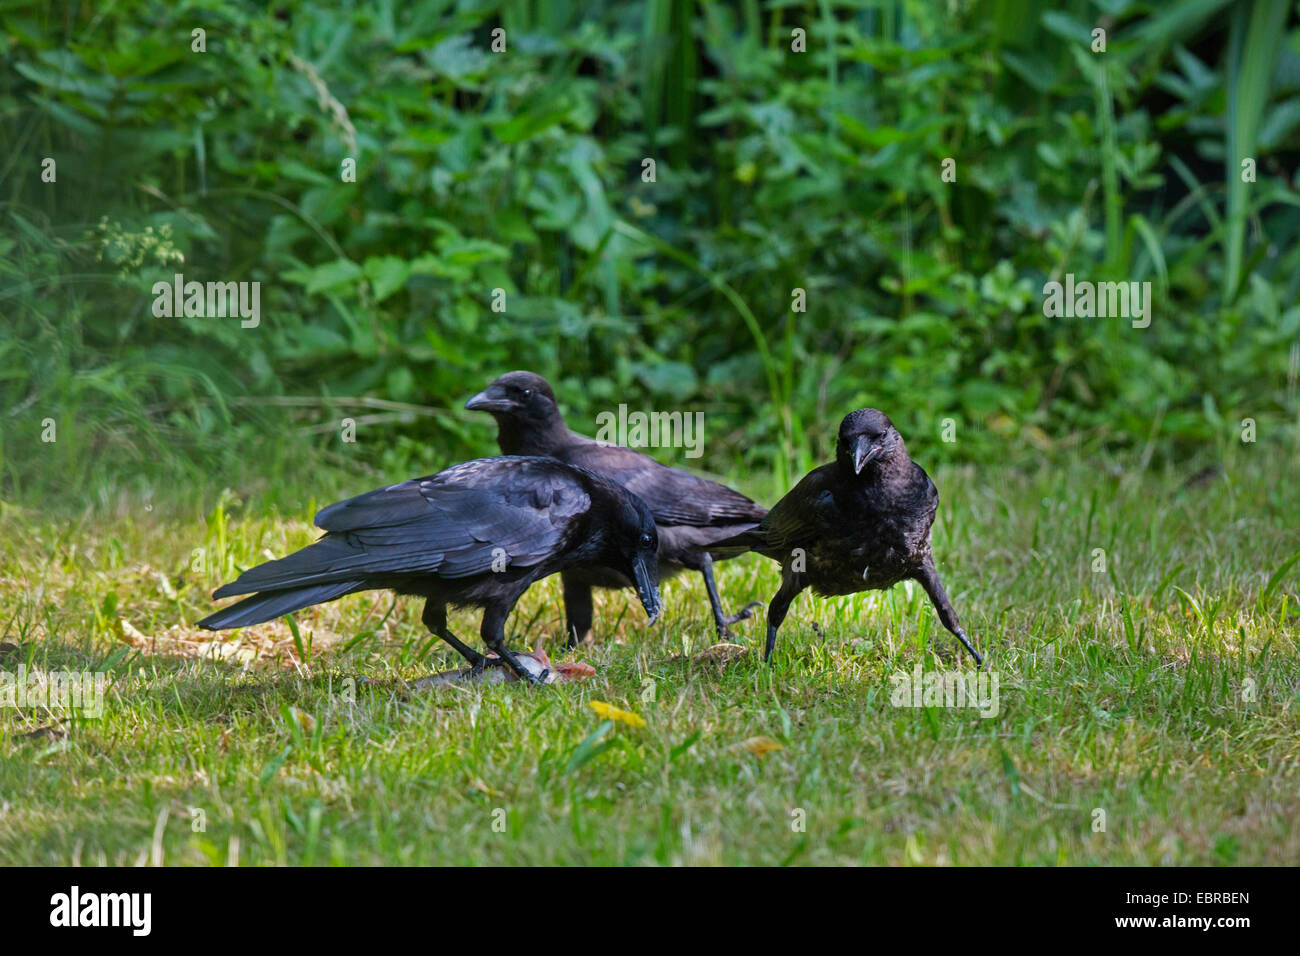 Carrion crow (Corvus corone, Corvus corone corone), adult crow with two juvenile Crows at a dead fish, Germany, Bavaria Stock Photo